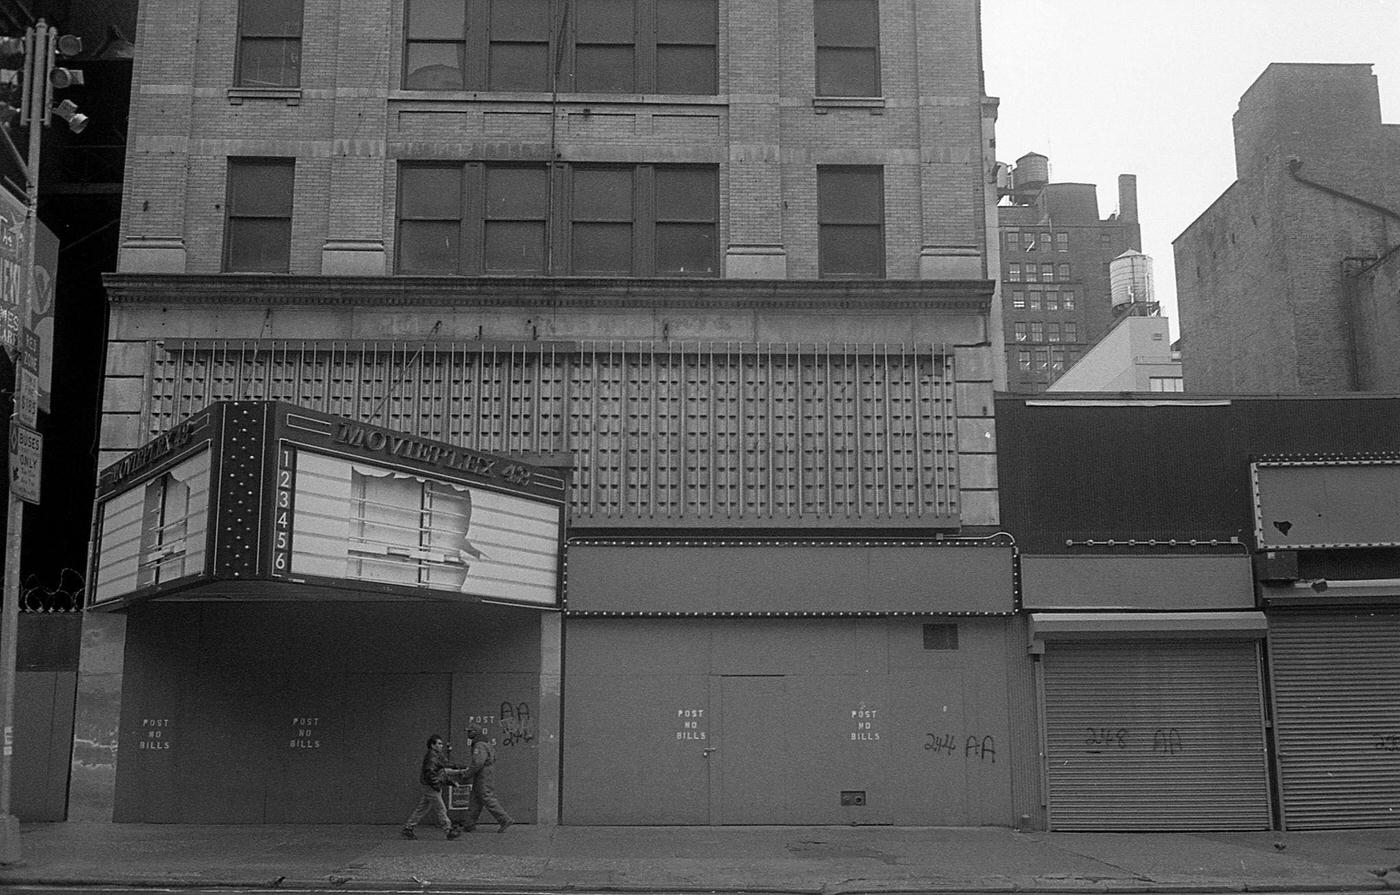 Exterior View Of The Shuttered Movieplex 42 Theater On West 42Nd Street, Times Square, Manhattan, 1996